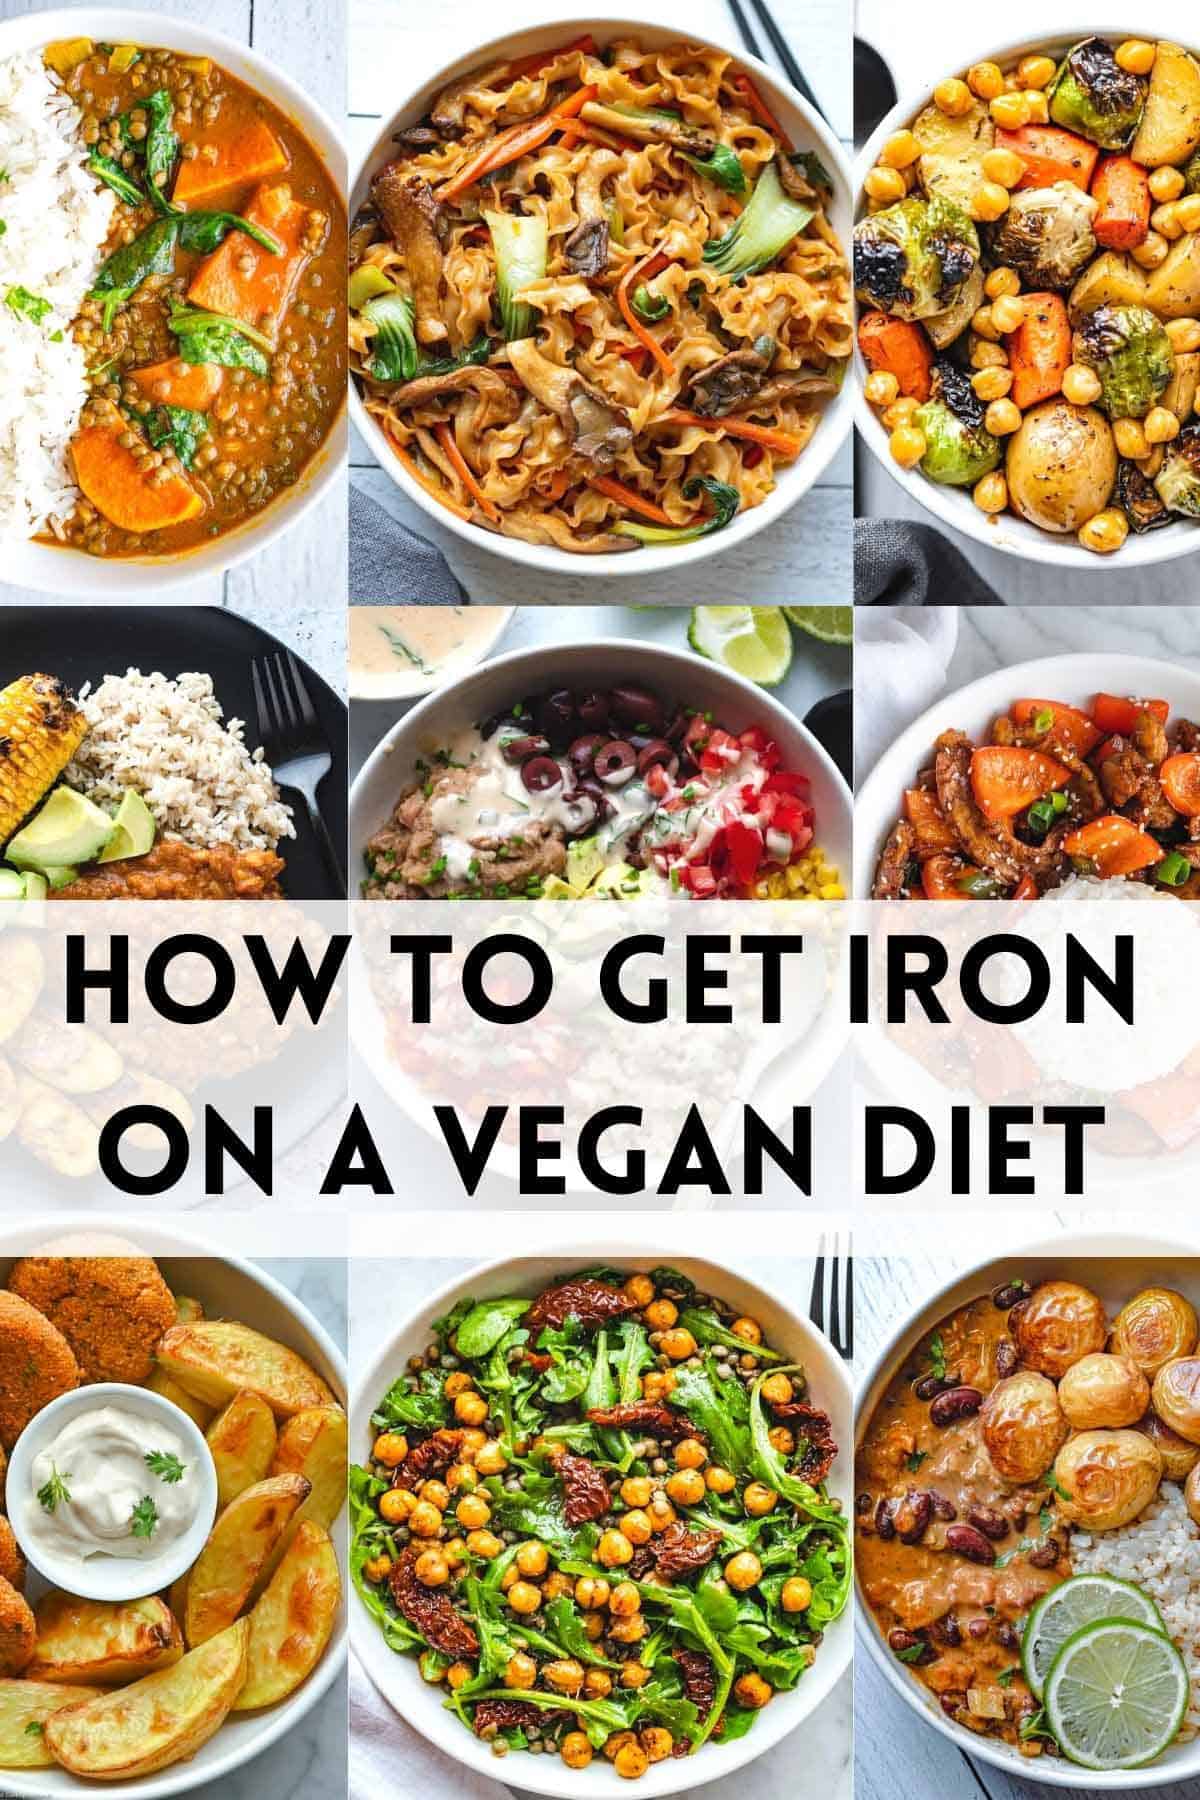 Nine vegan dinner recipes rich in iron with text overlay saying, 'How to Get Iron on a Vegan Diet.'